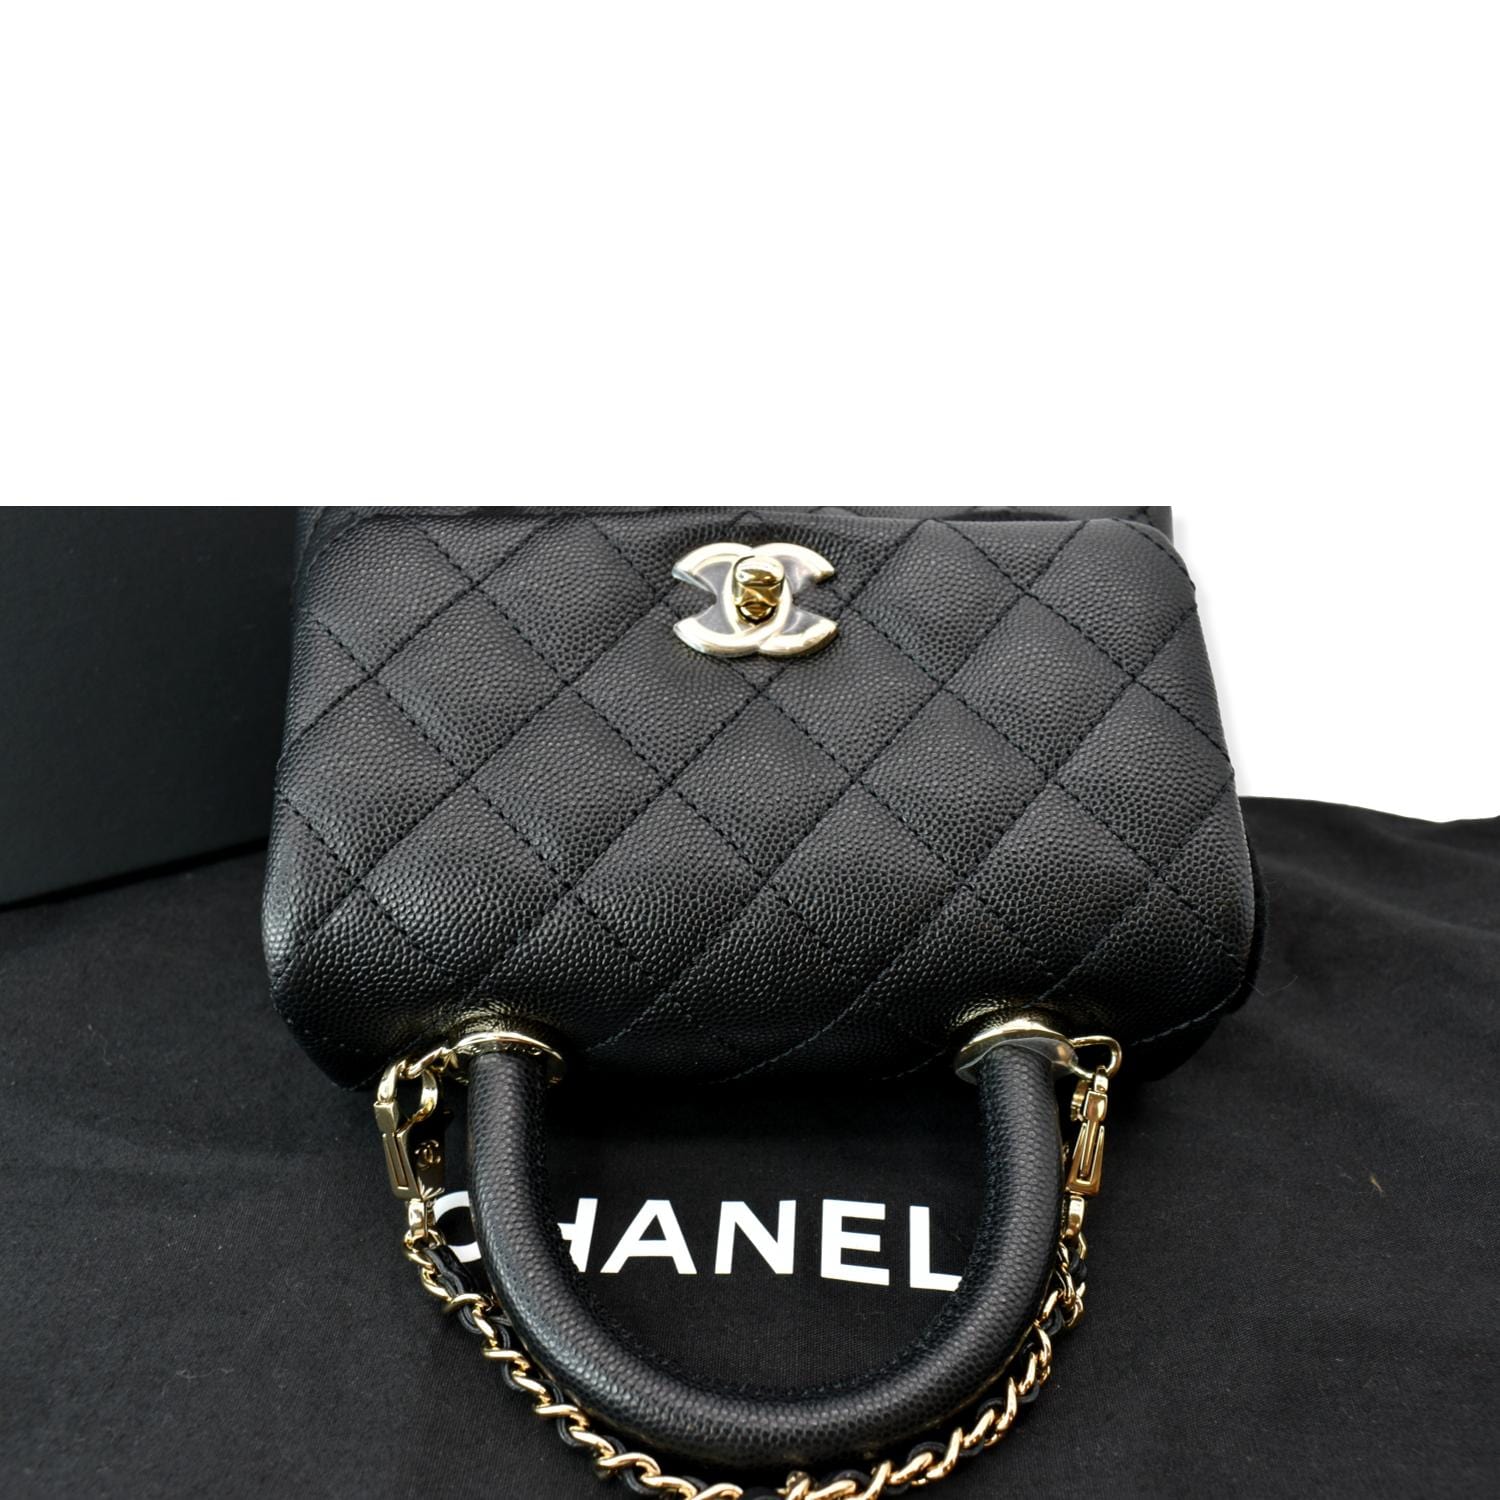 chanel tote bag for sale